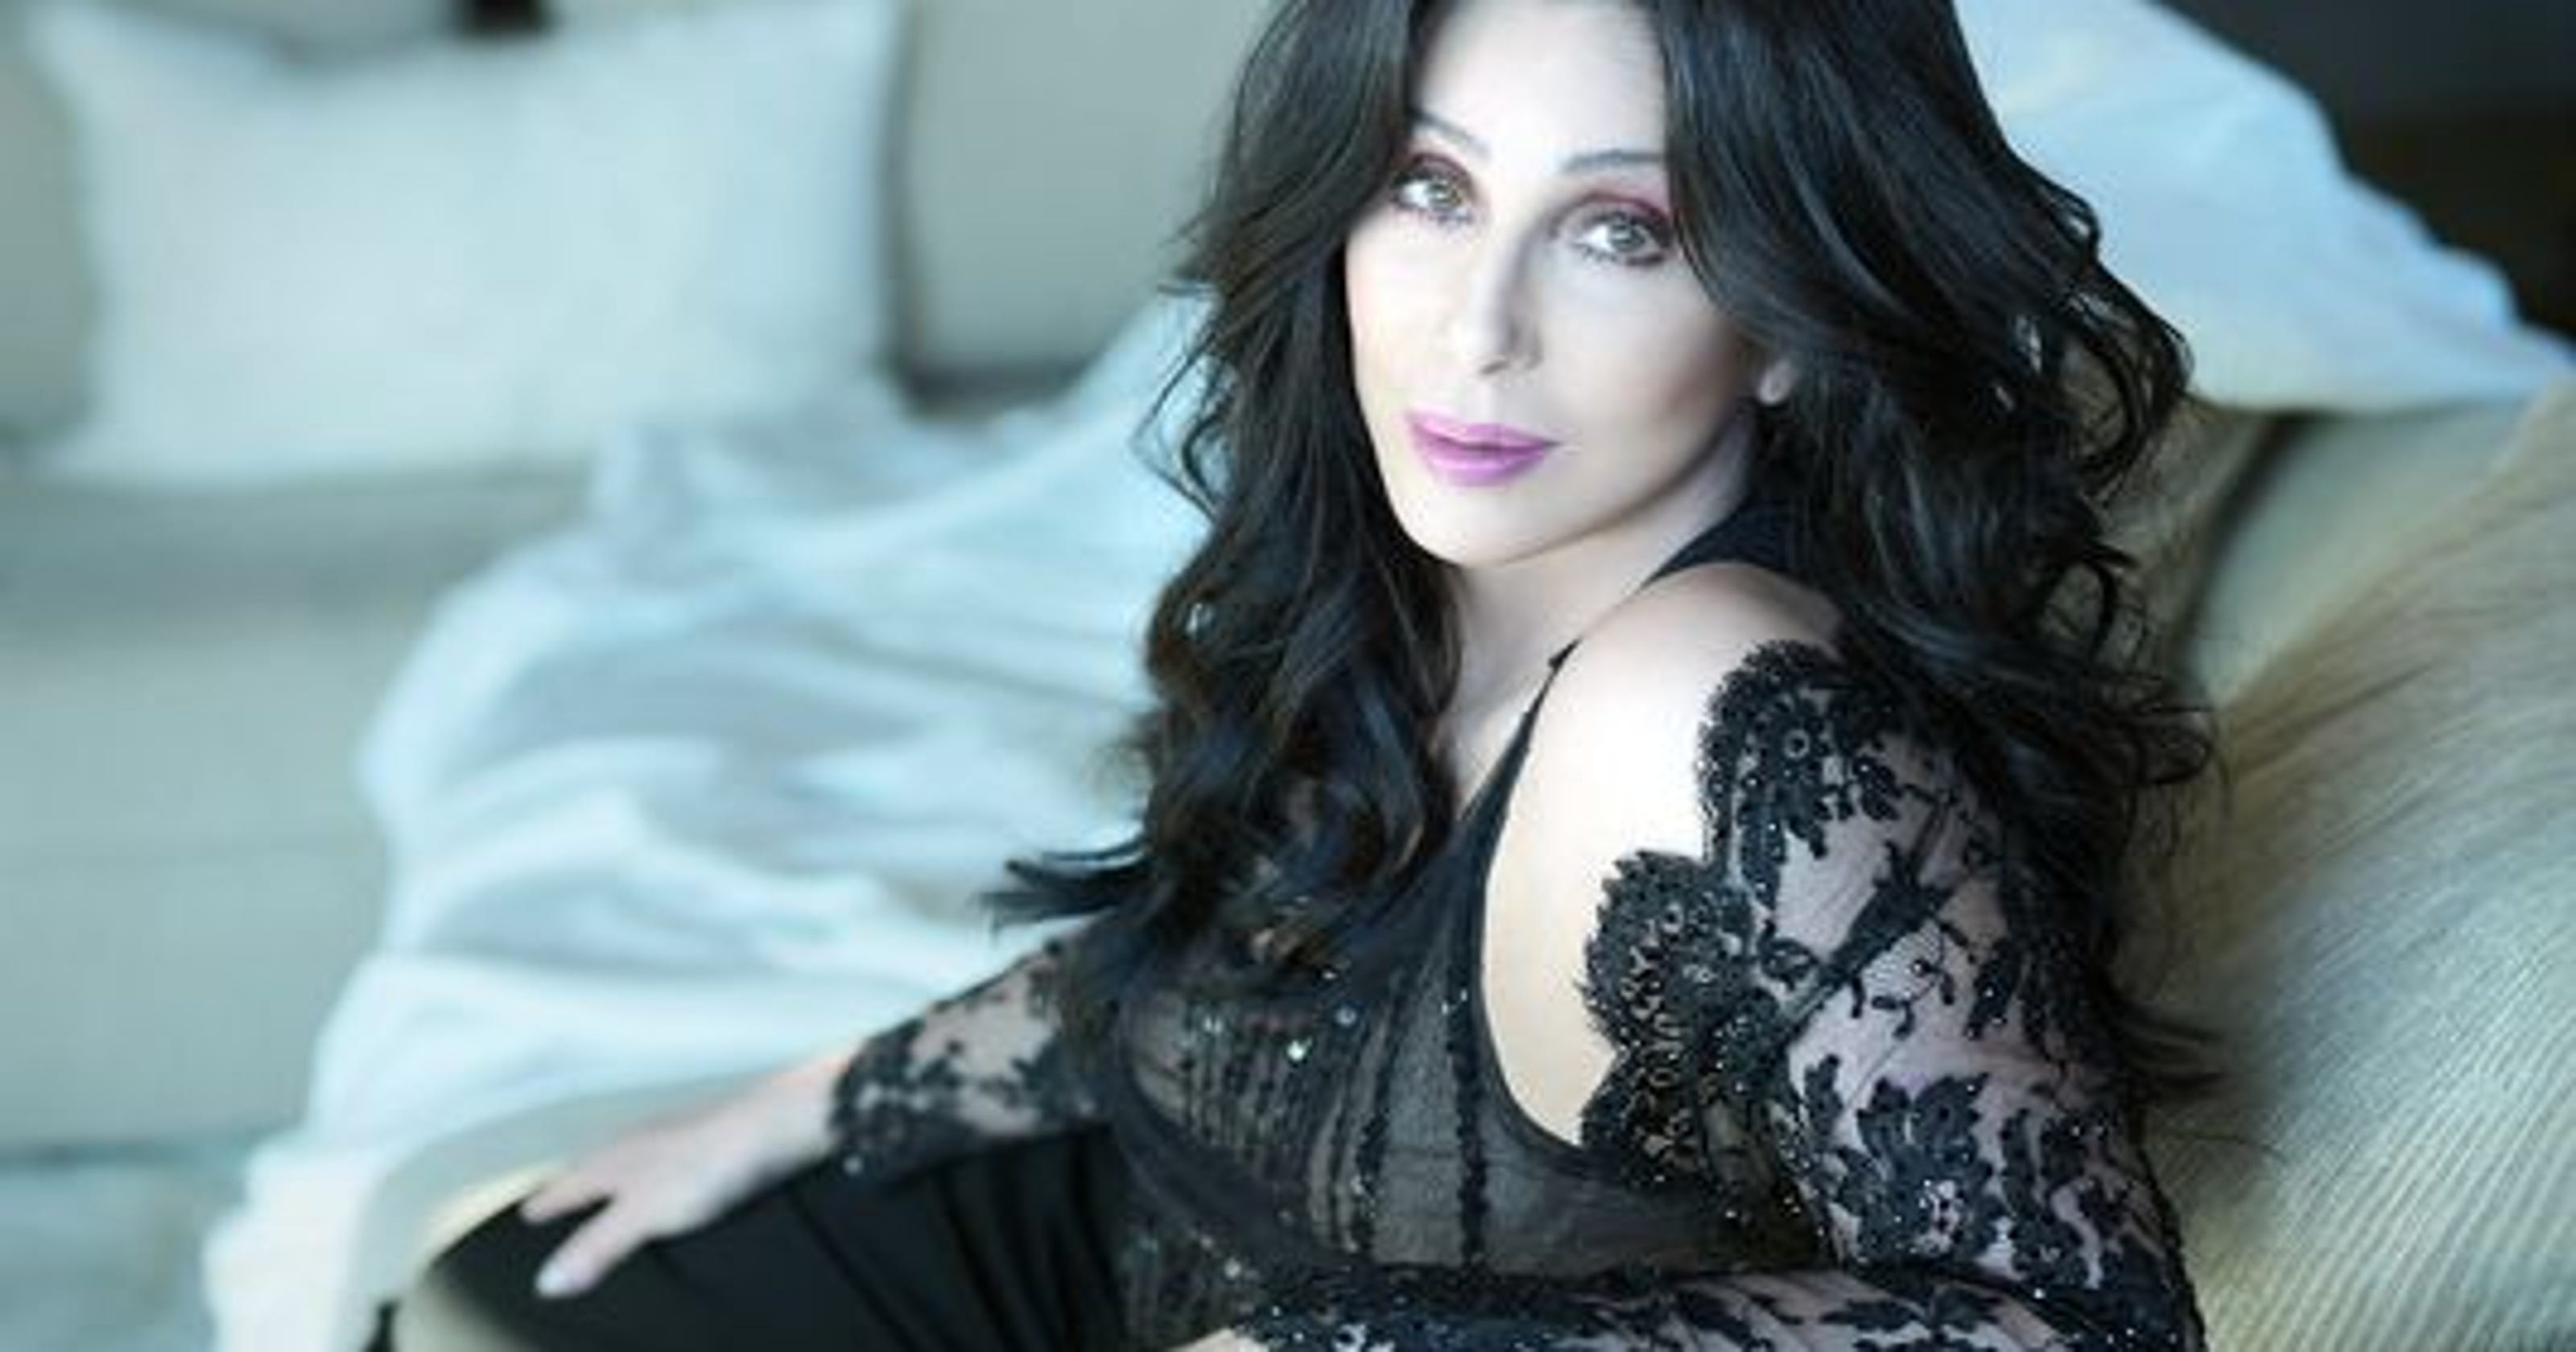 Cher returns to home she shared with Sonny Bono